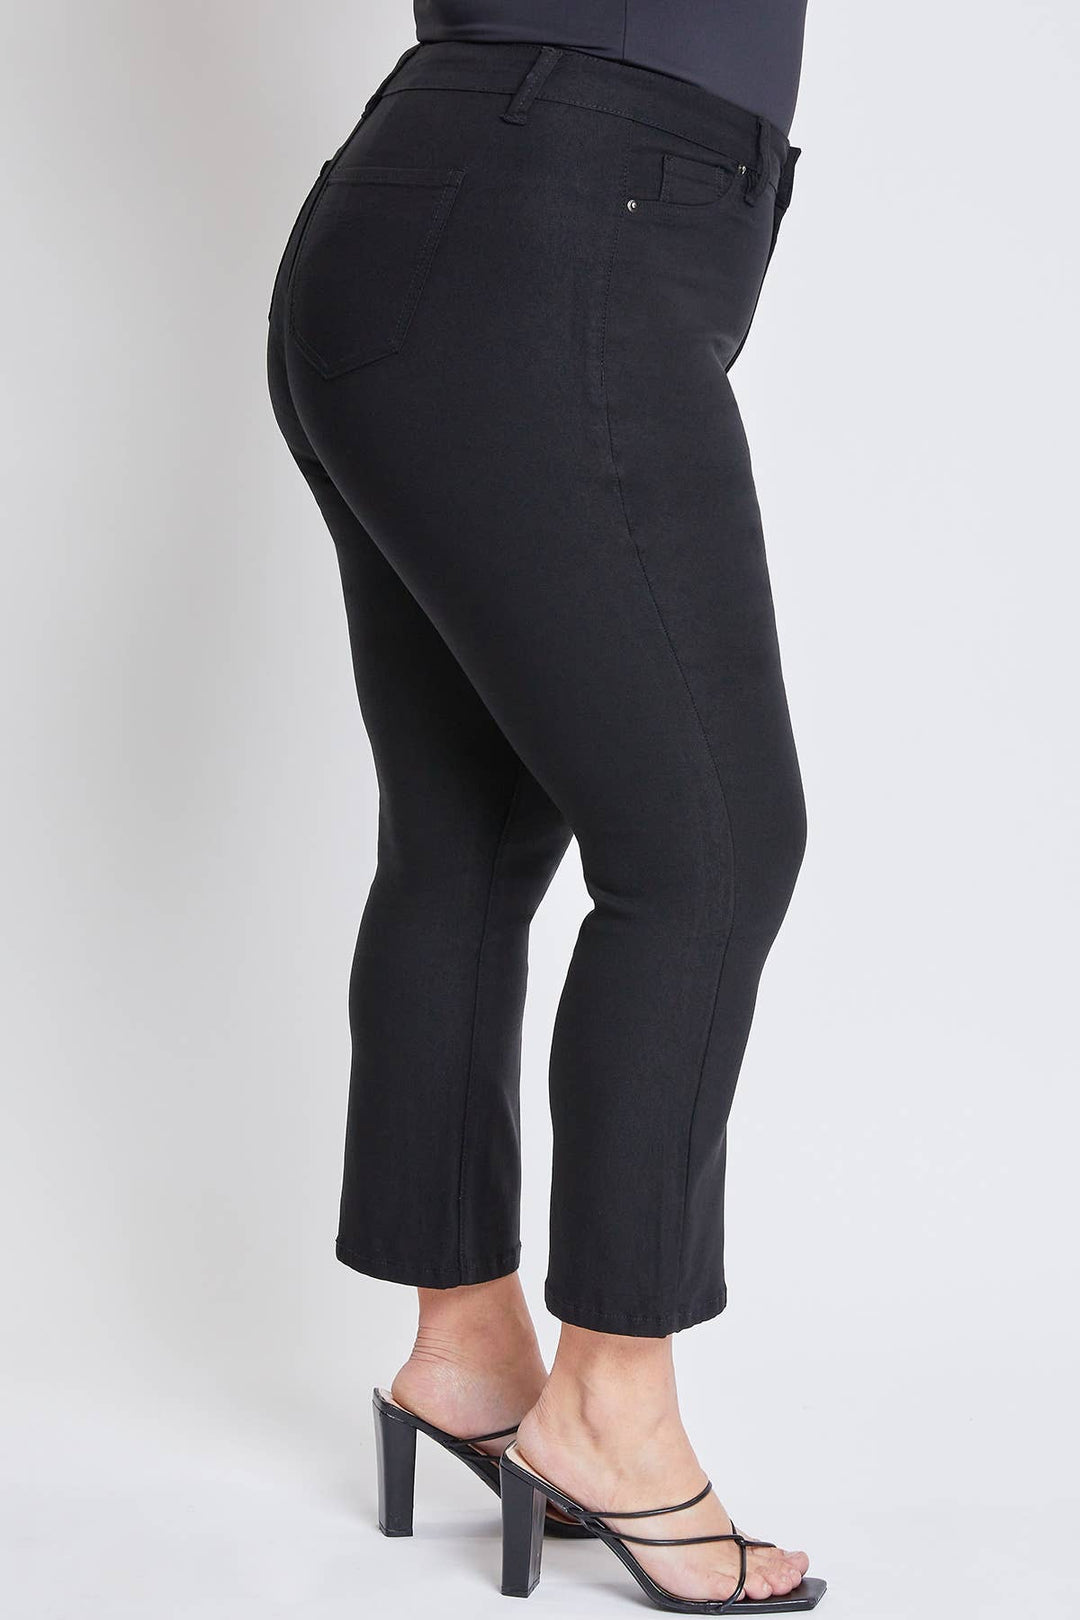 YMI Hyperstretch Cropped Kick Flare Pants, Black-Pants-Inspired by Justeen-Women's Clothing Boutique in Chicago, Illinois